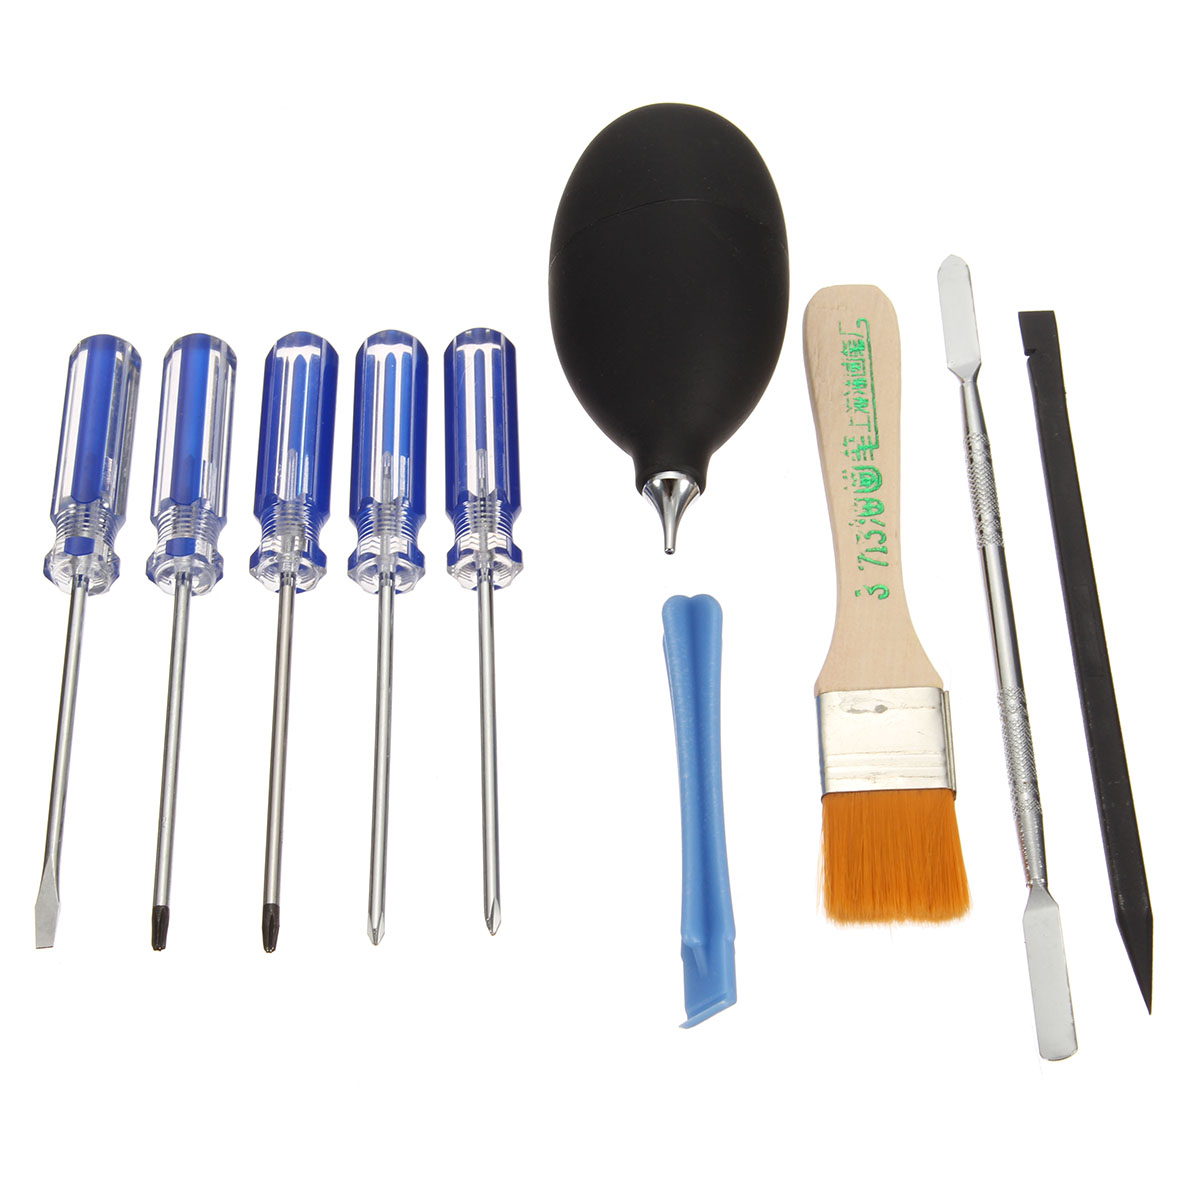 Find Replacement Repair Tools Kit Screwdriver For for Play Station 4 PS4 for Xbox One Game Console for Sale on Gipsybee.com with cryptocurrencies